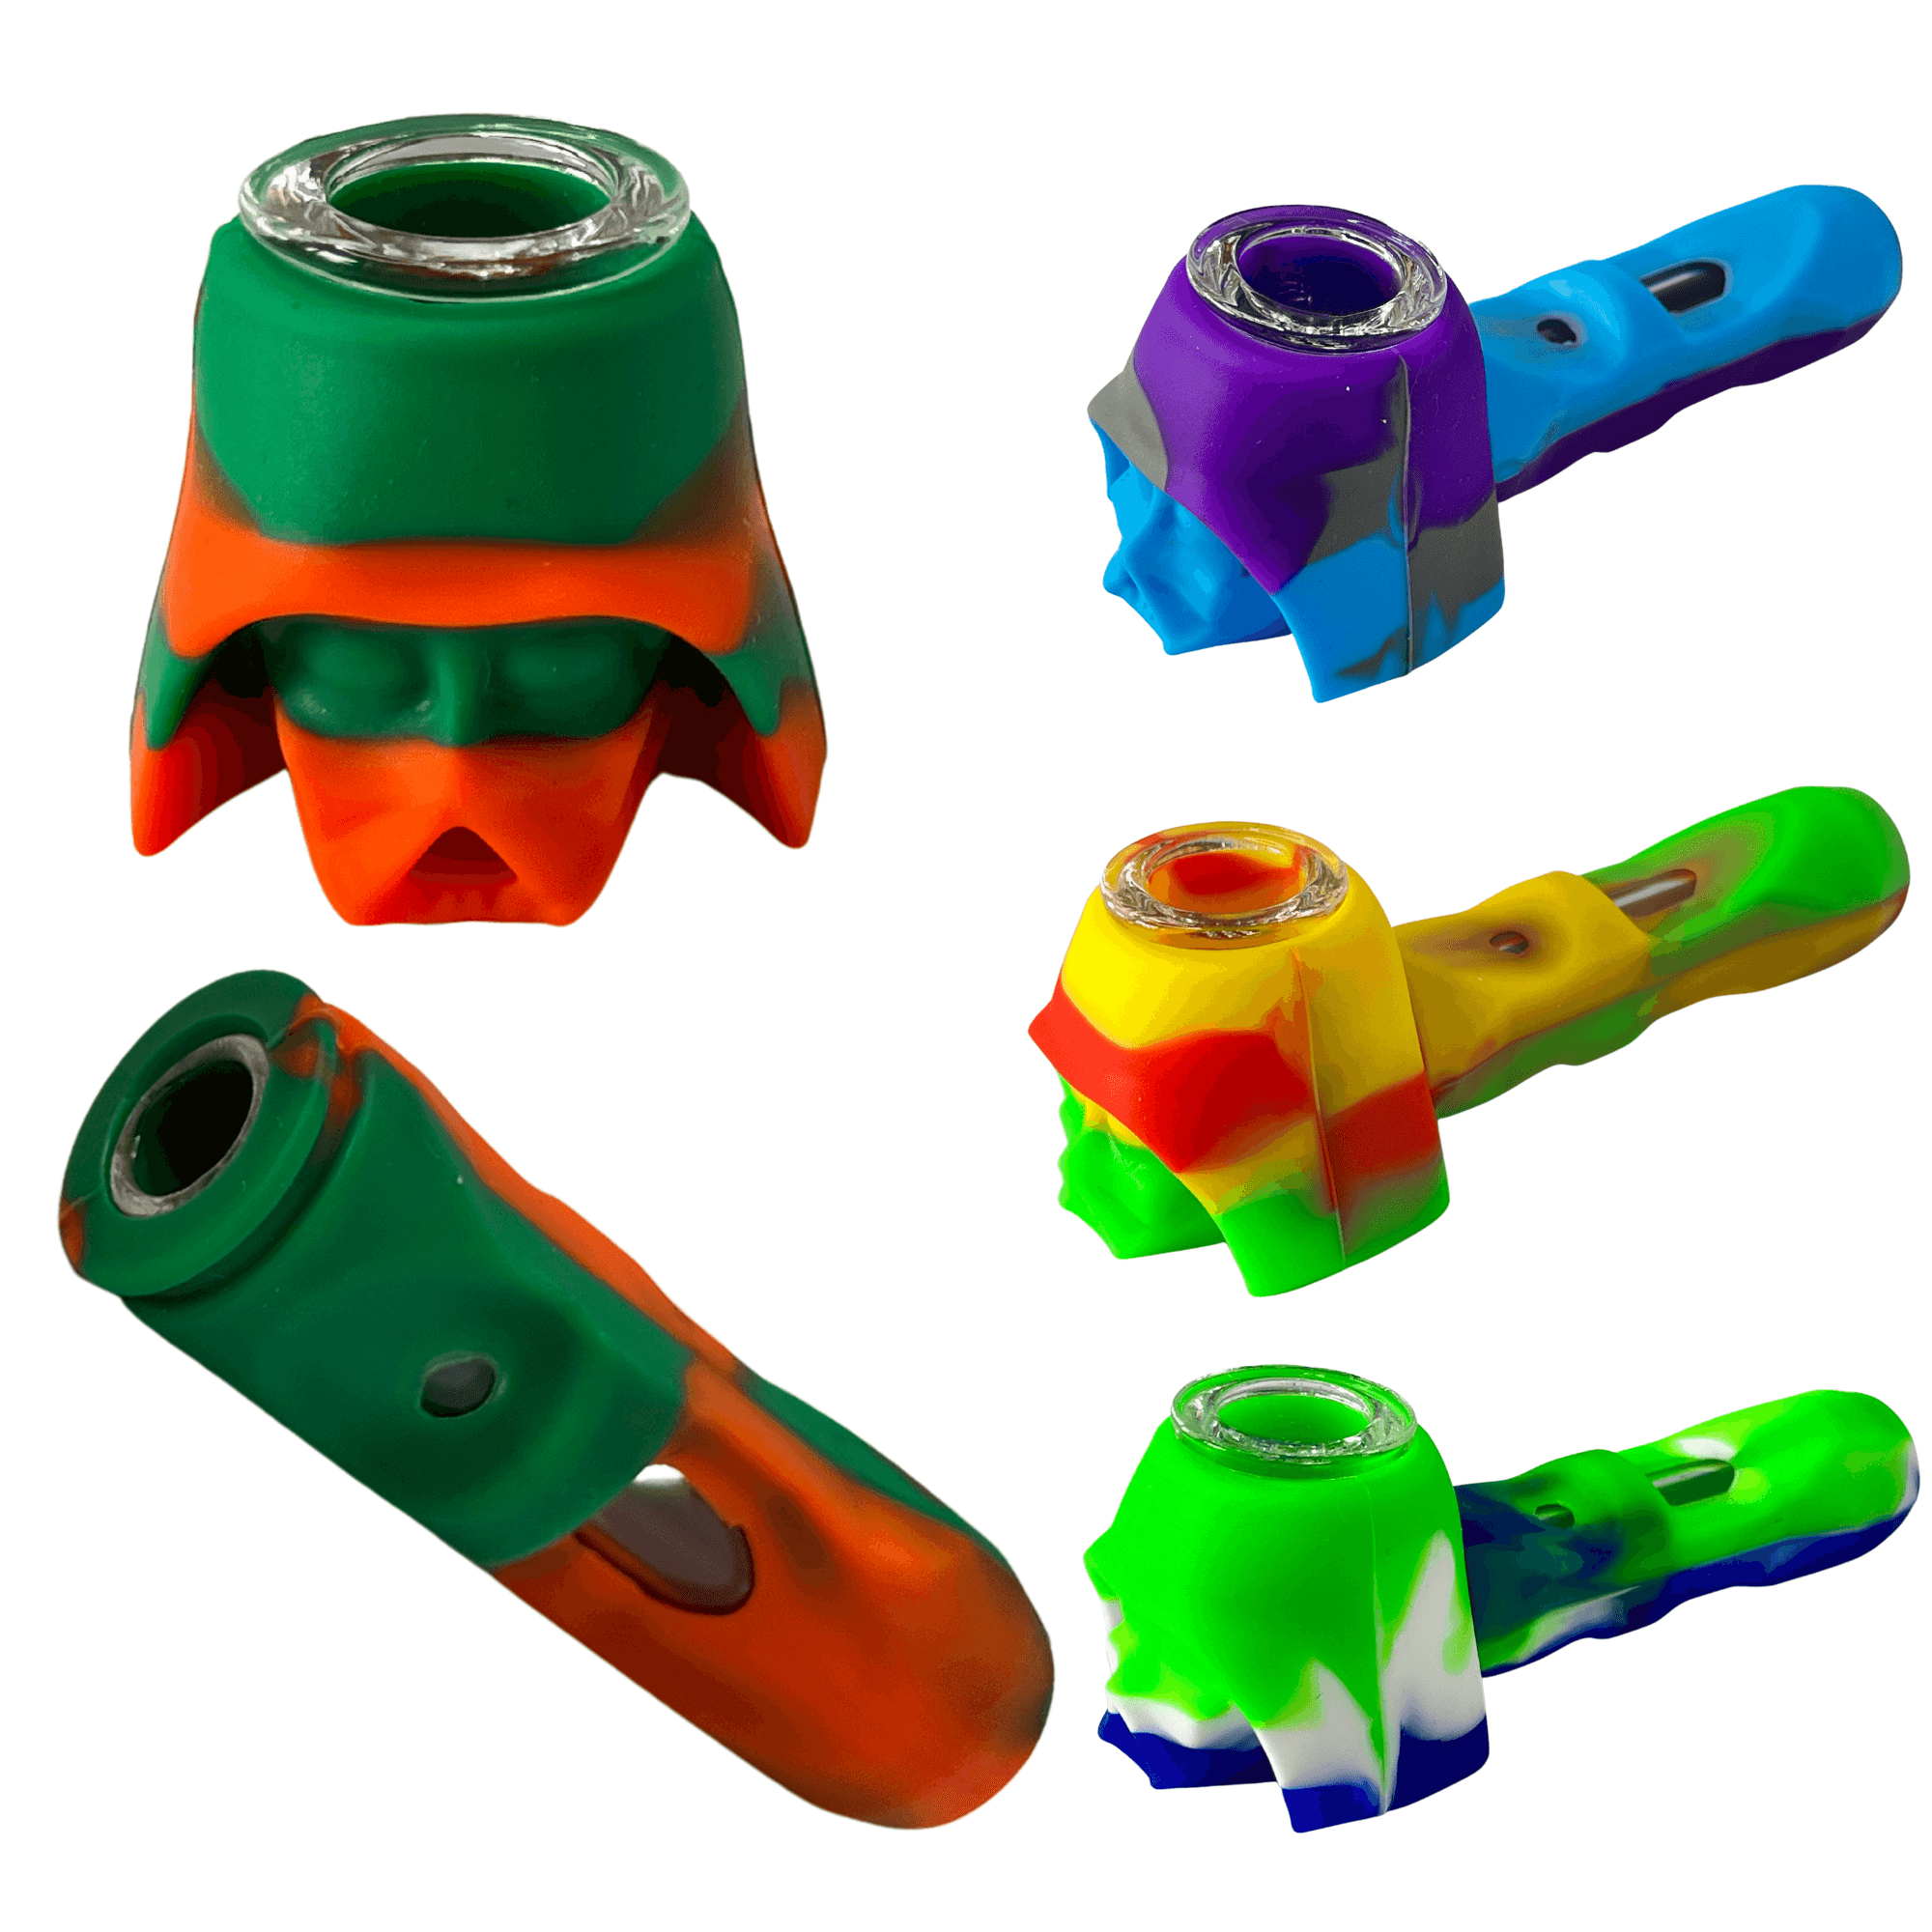 Themed Space Pipe - Cyberpuffs